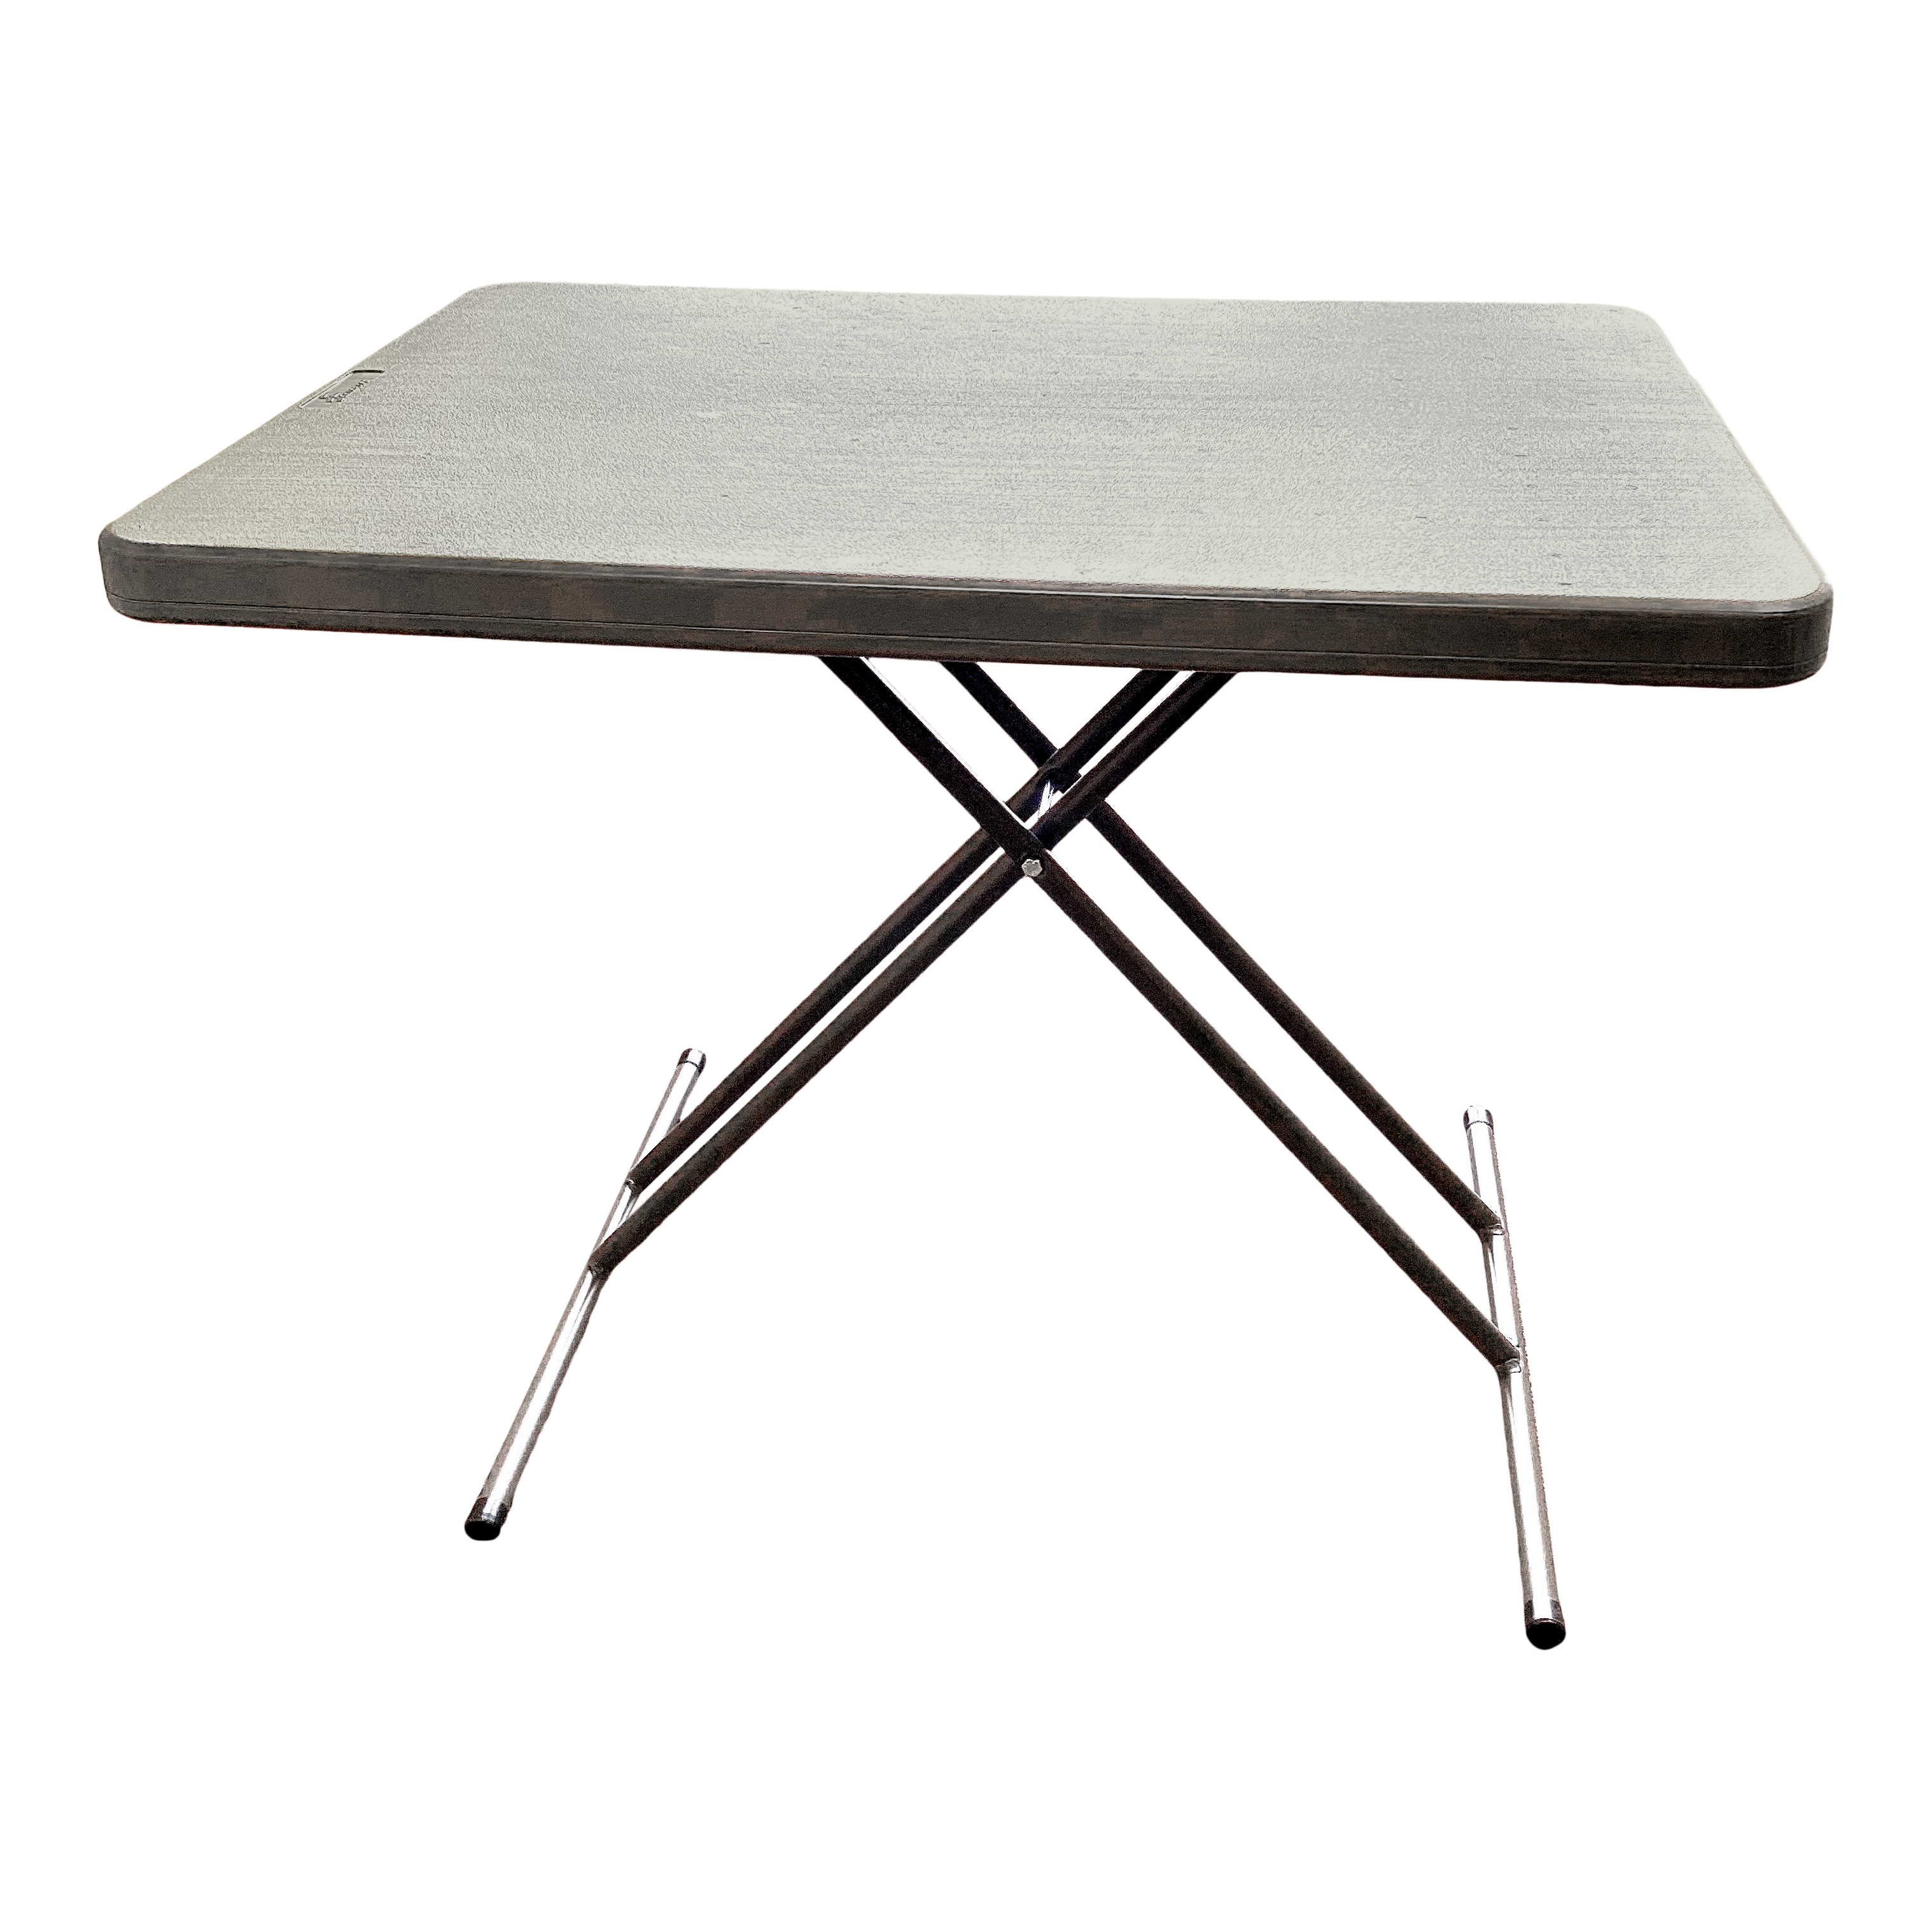 One charcoal table.